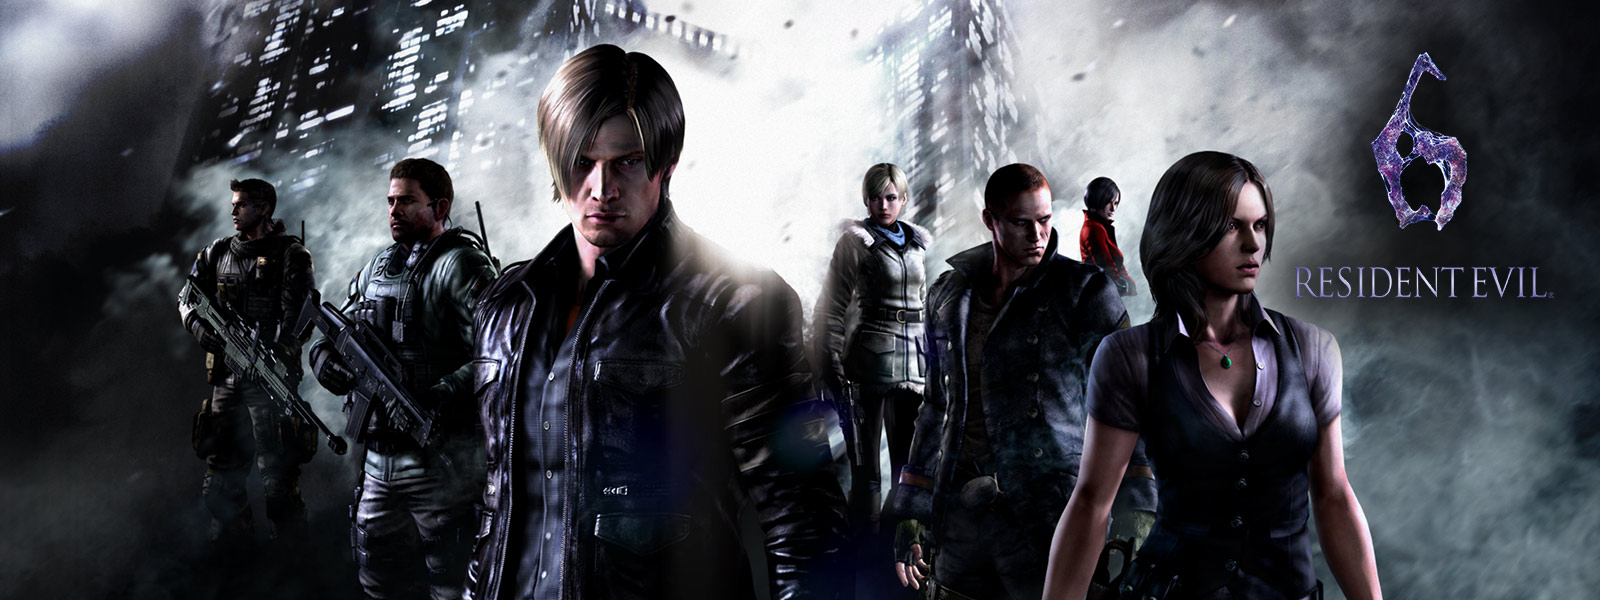 Resident Evil 6, all resident evil characters standing in front of ominous sky scrapers